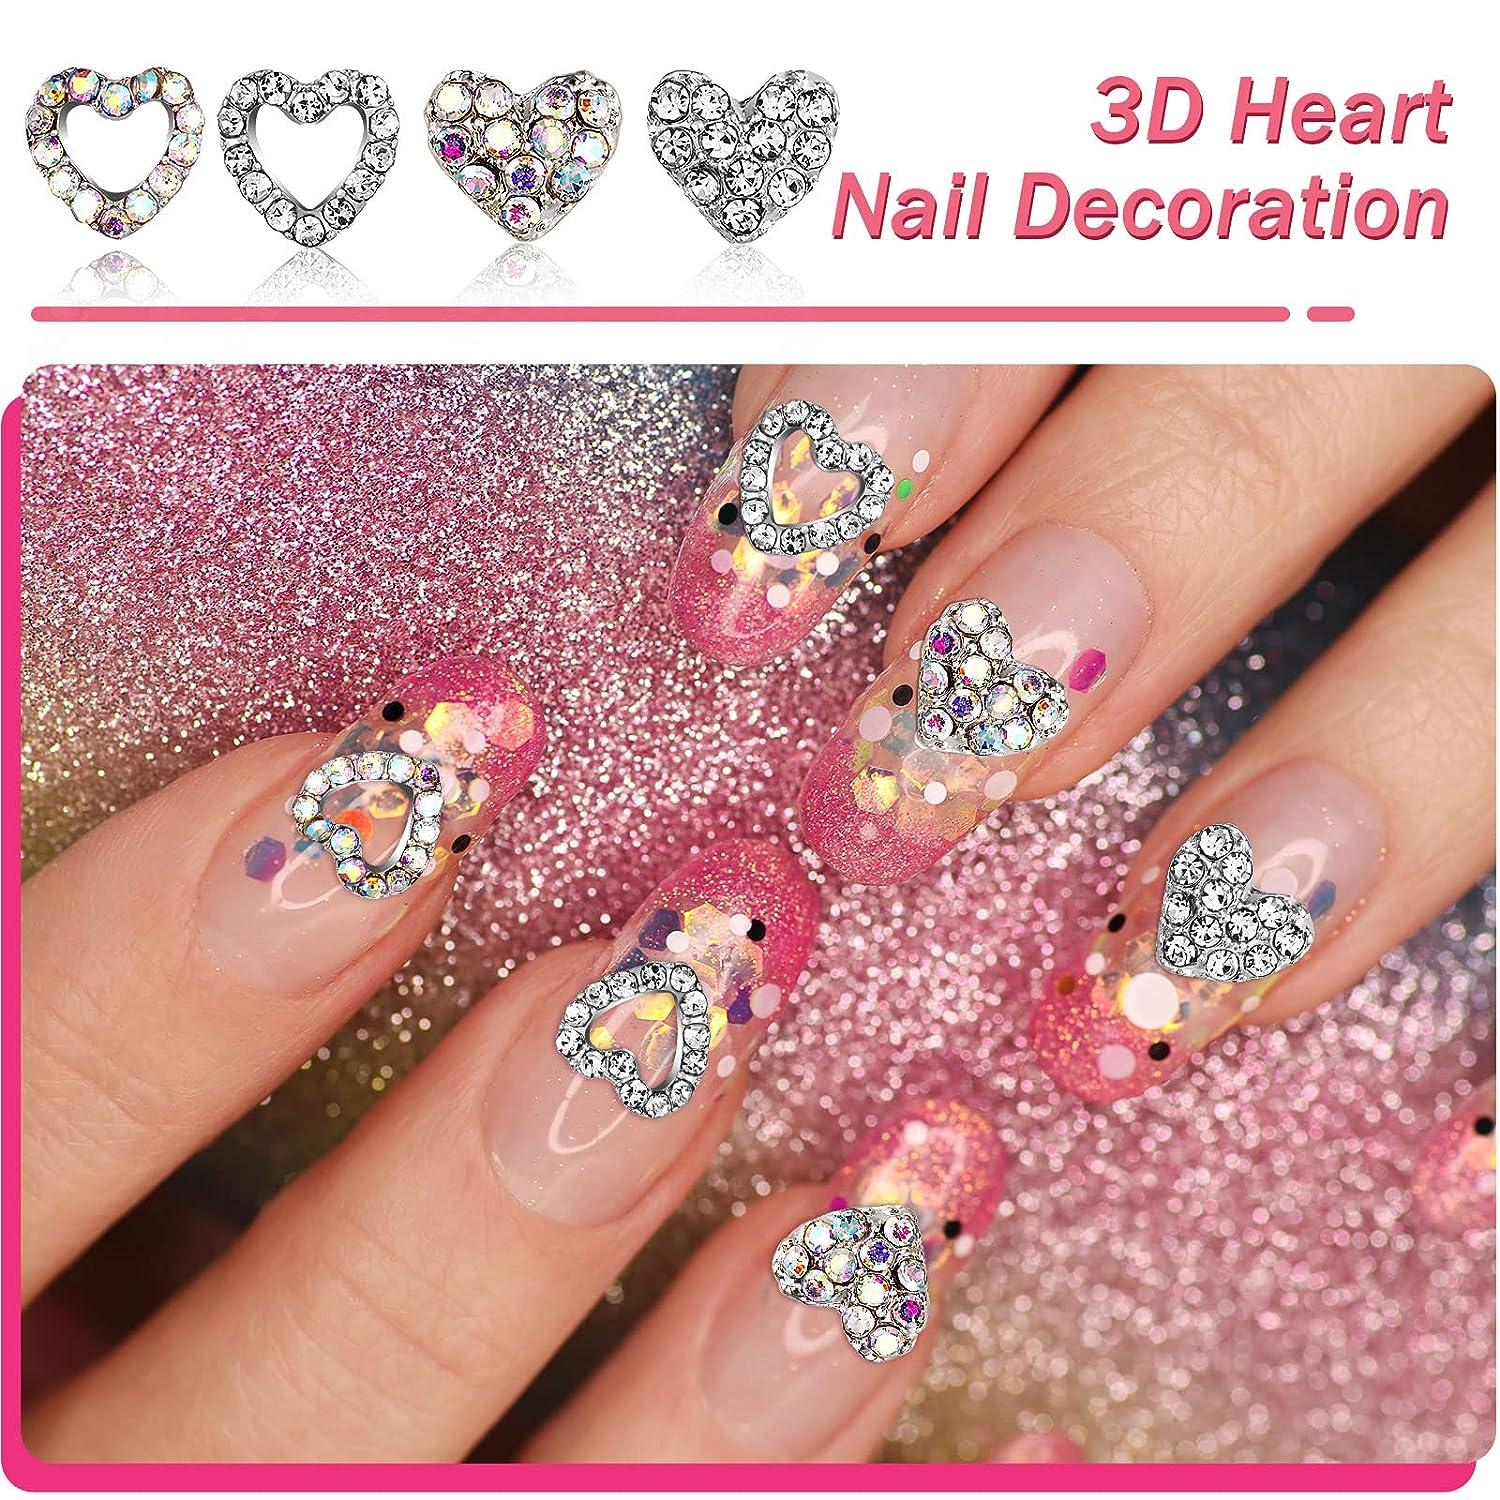  Leelosp 32 Pieces Valentine's Day Nail Charms Heart Rhinestone  for Nails Red Heart Nail Crystals Gems Diamond Manicure Gold Alloy Nail  Decorations for Women Girls Manicure Jewelry Making Crafts : Beauty